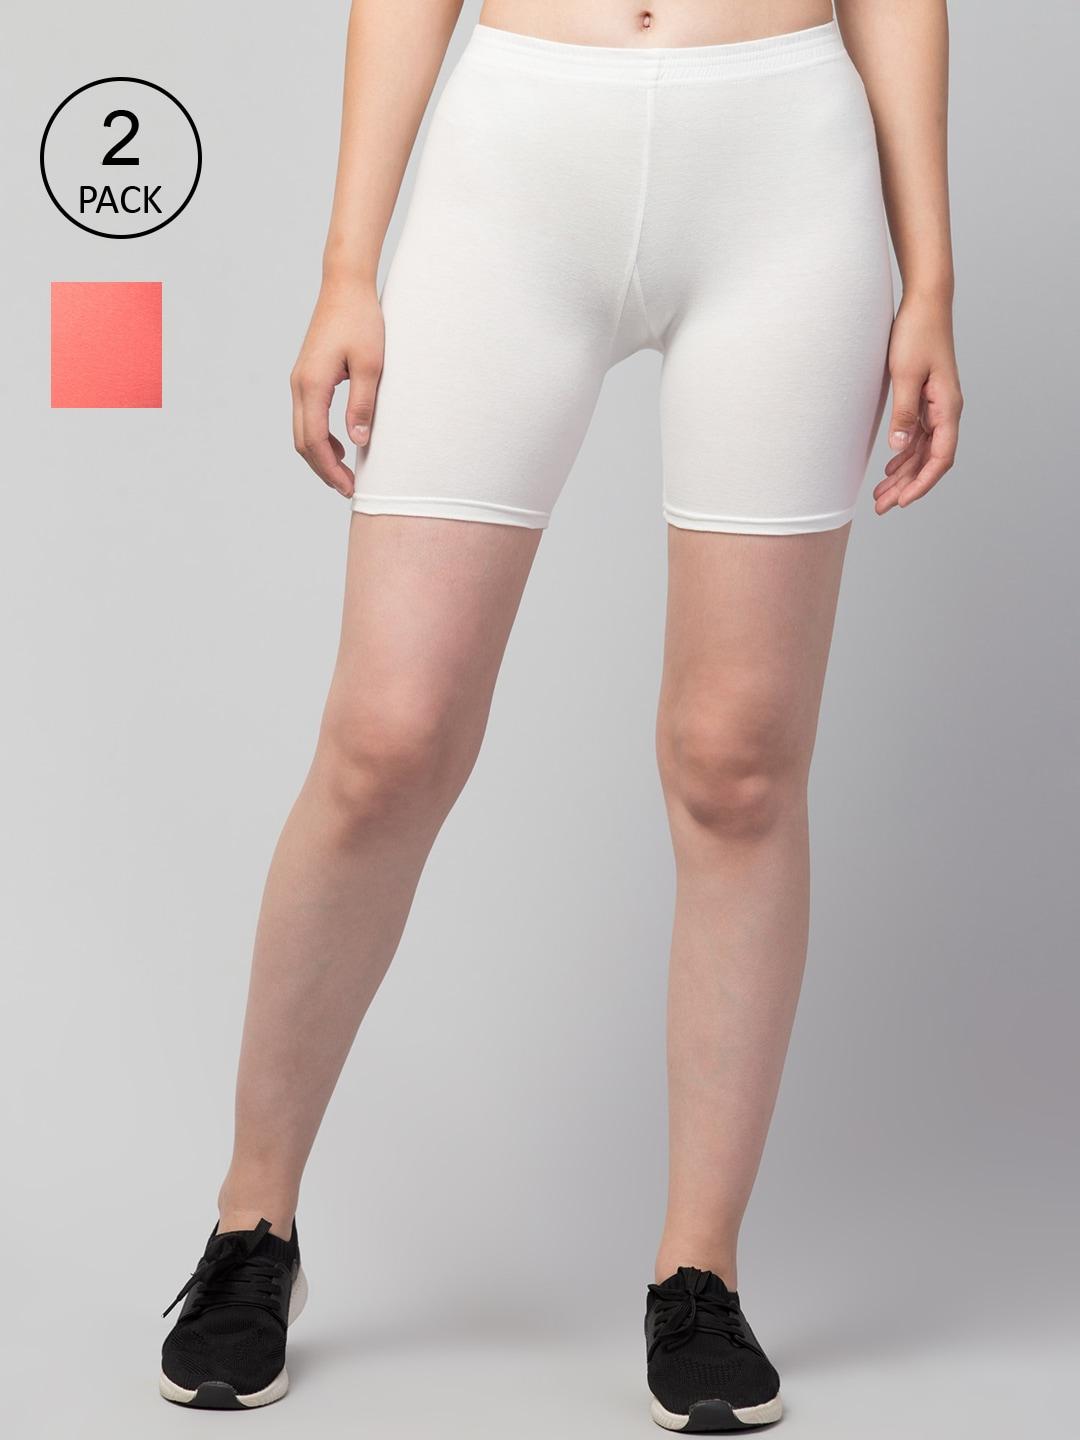 apraa-&-parma-women-pack-of-2-white-and-peach-cotton-cycling-sports-shorts